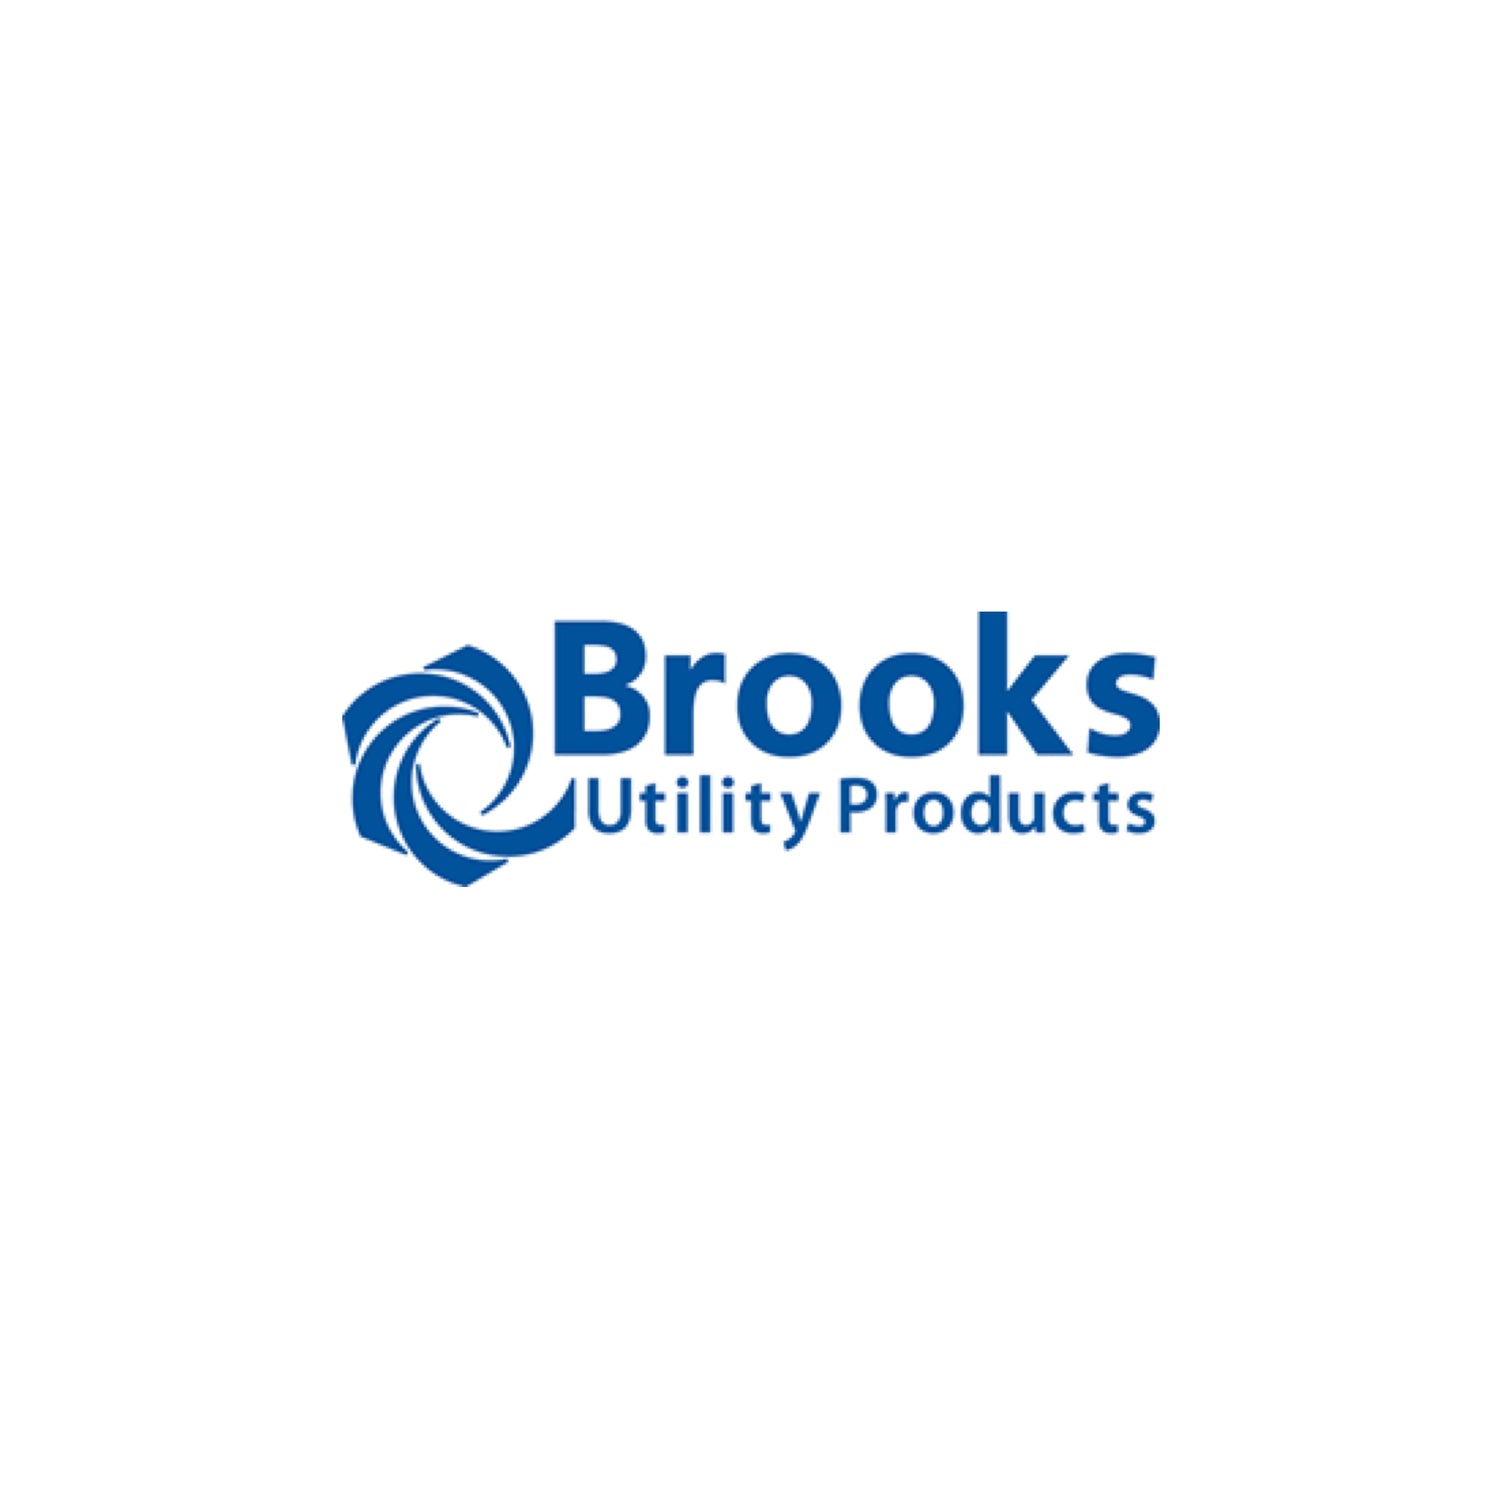 BROOKS UTILITY PRODUCTS